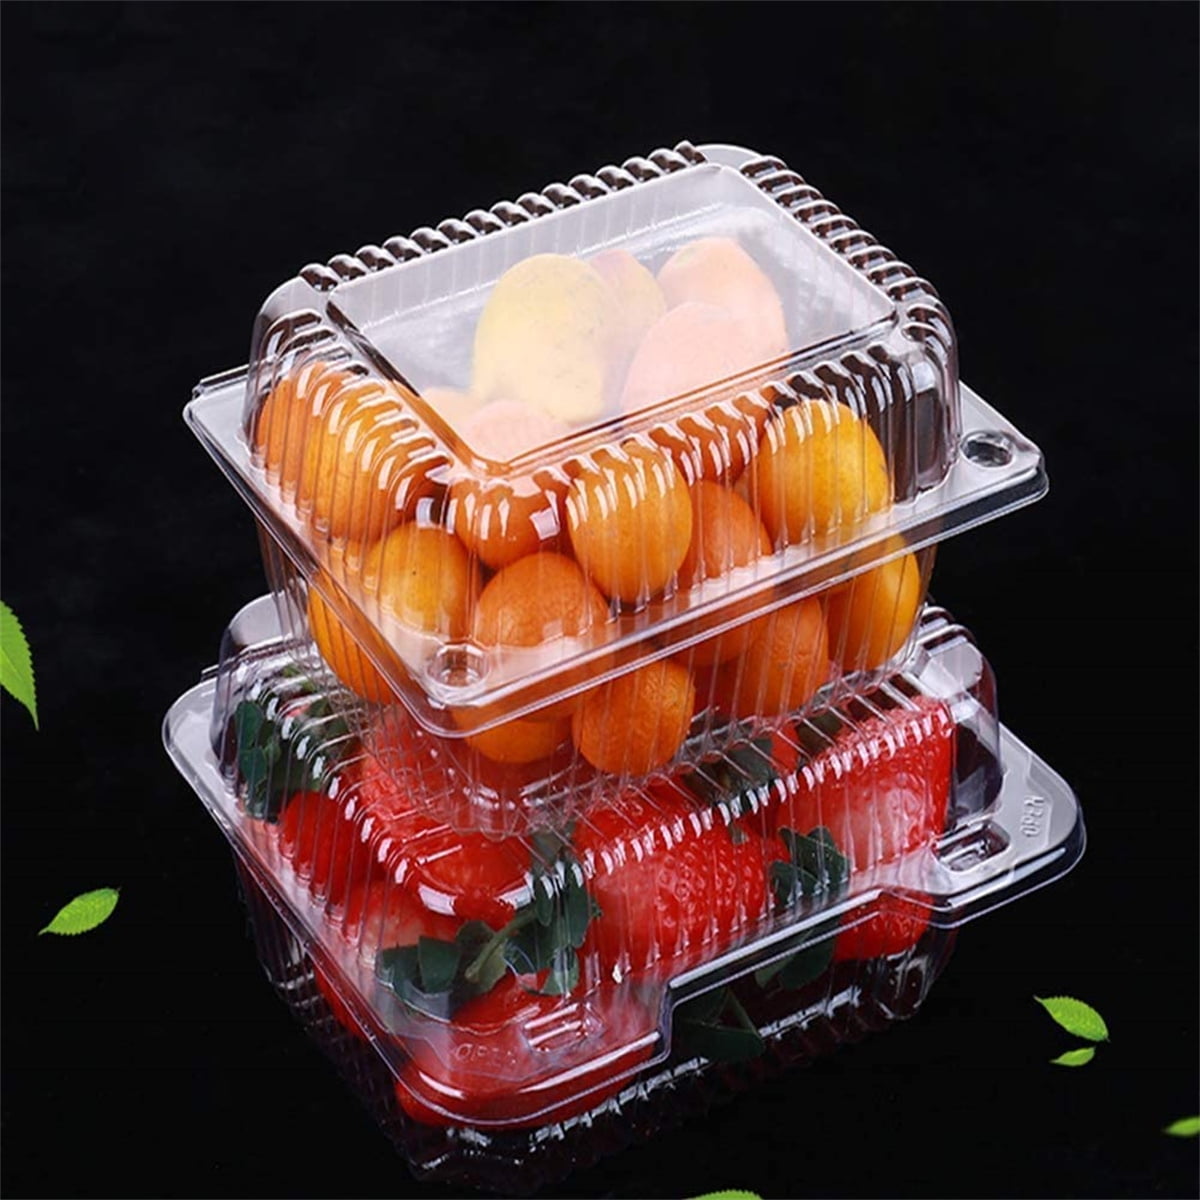 Szsrcywd 100 Pack Clear Hinged Plastic Food Containers,Clamshell Take Out  Trays,Dessert Containers To Go Boxes for Salads,Pasta,Sandwiches,Cookie,5.7